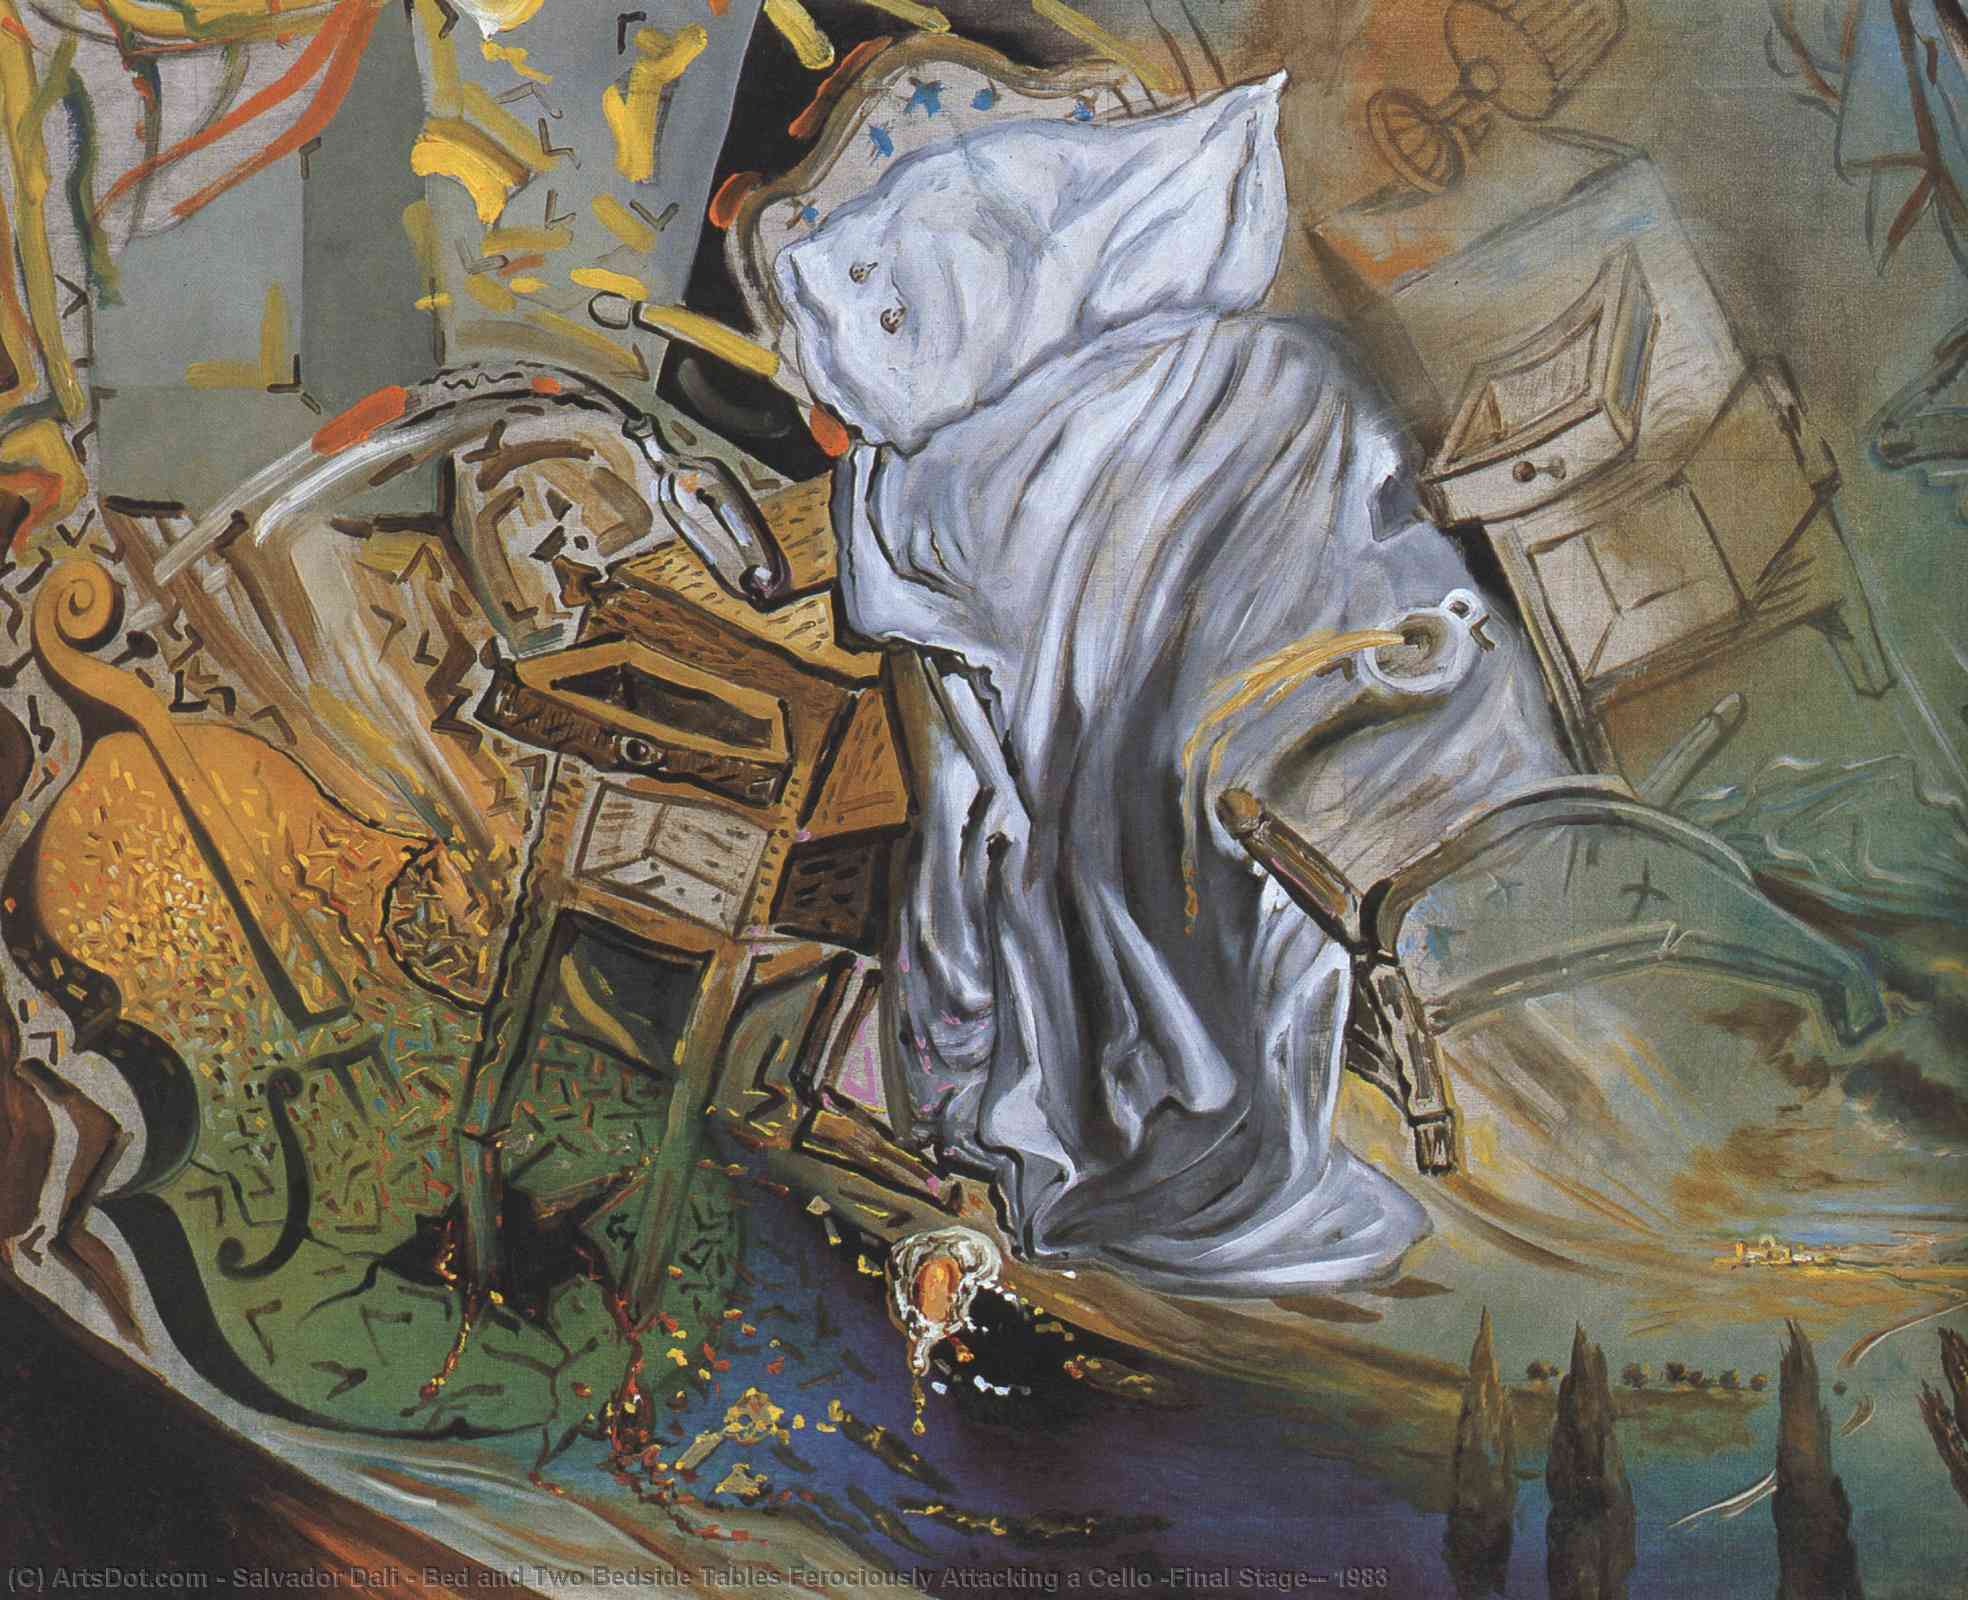 WikiOO.org - دایره المعارف هنرهای زیبا - نقاشی، آثار هنری Salvador Dali - Bed and Two Bedside Tables Ferociously Attacking a Cello (Final Stage), 1983